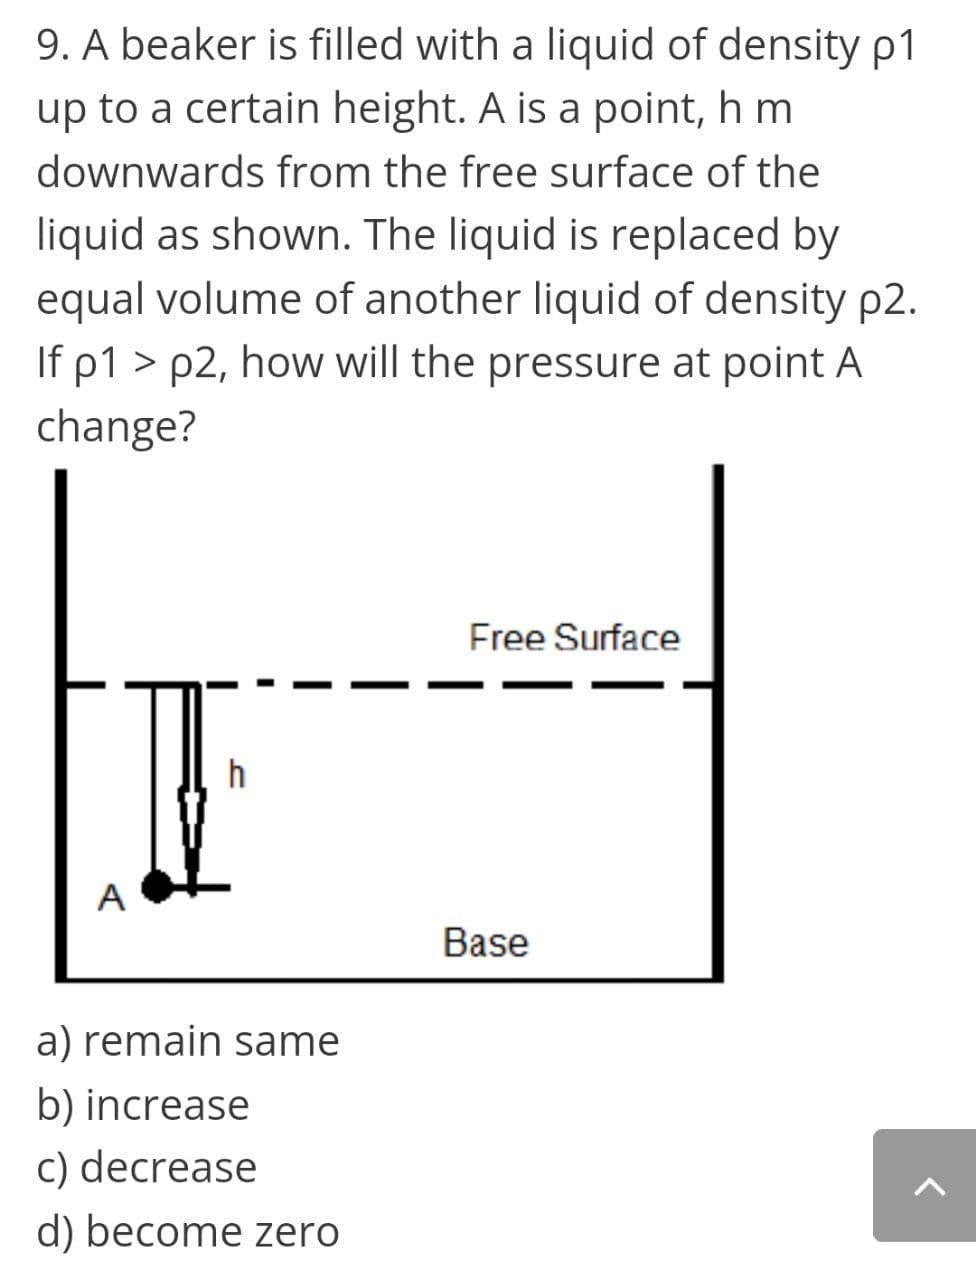 9. A beaker is filled with a liquid of density p1
up to a certain height. A is a point, h m
downwards from the free surface of the
liquid as shown. The liquid is replaced by
equal volume of another liquid of density p2.
If p1 > p2, ho will the pressure at point A
change?
Free Surface
h
A
Base
a) remain same
b) increase
c) decrease
d) become zero
